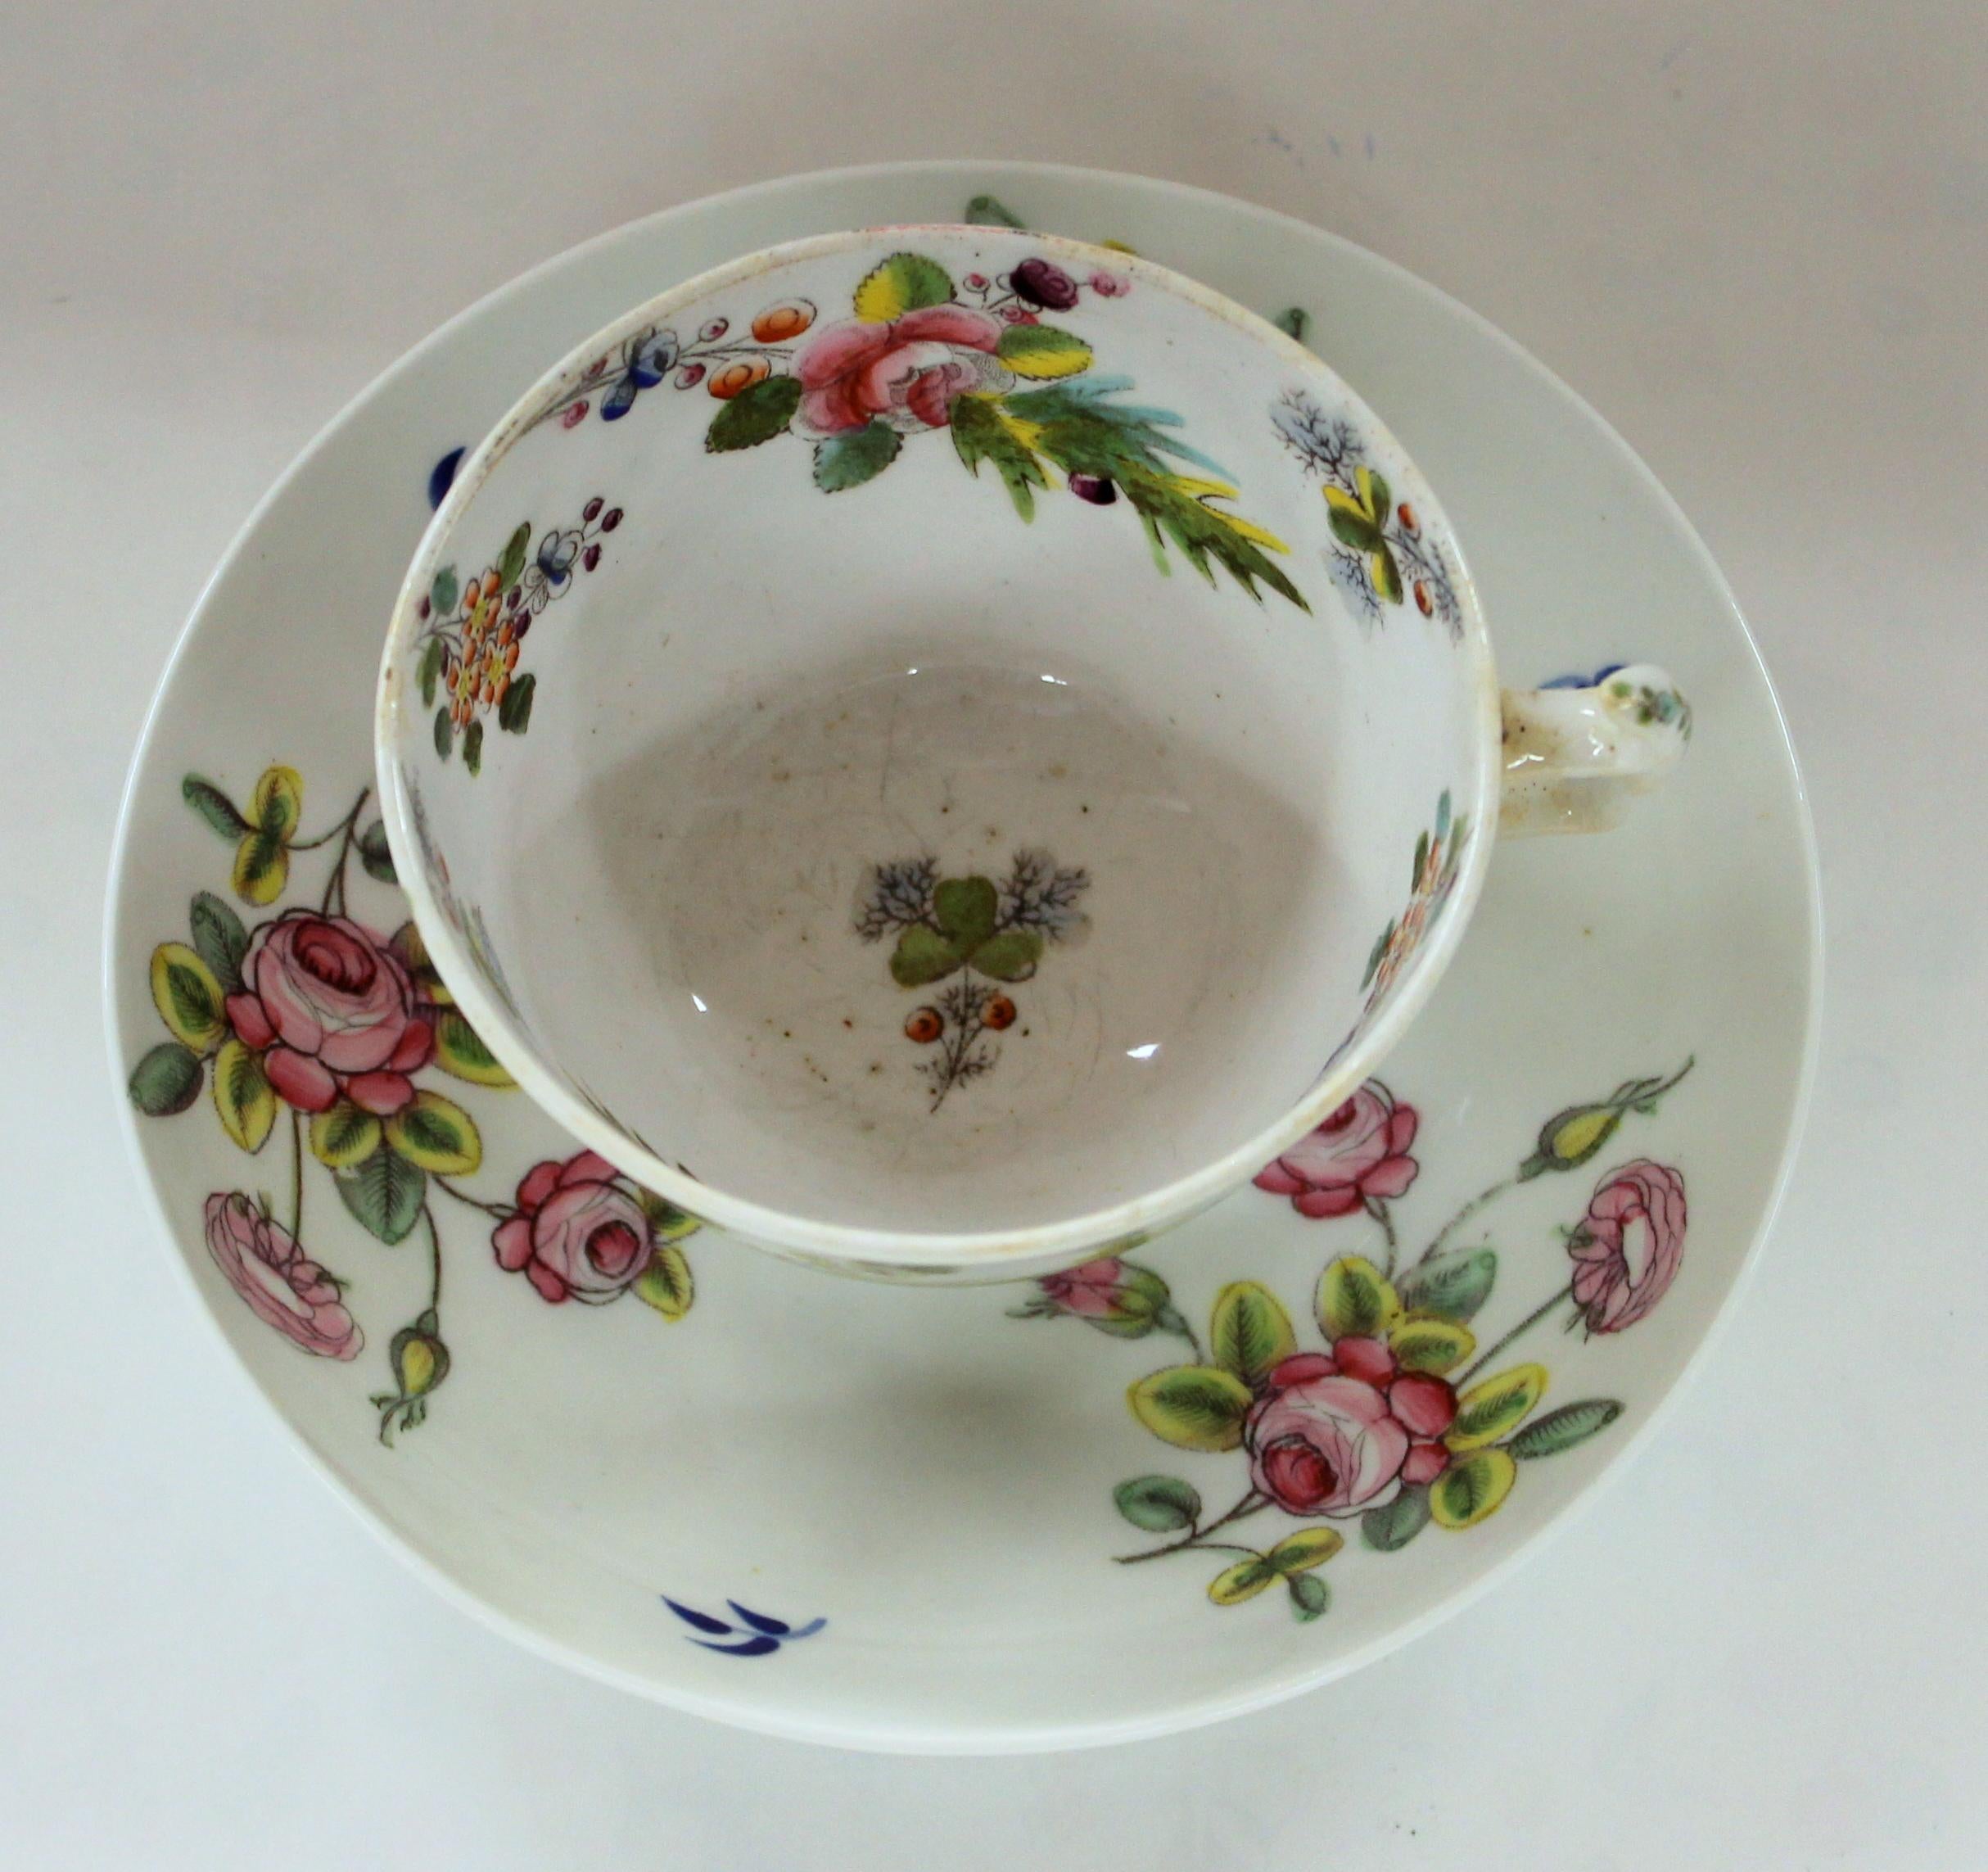 Rare and fine antique English new hall porcelain floral decor cup and saucer
Rare printed mark on saucer. Pristine condition. Colors are still vibrant.

Saucer: 5 1/2